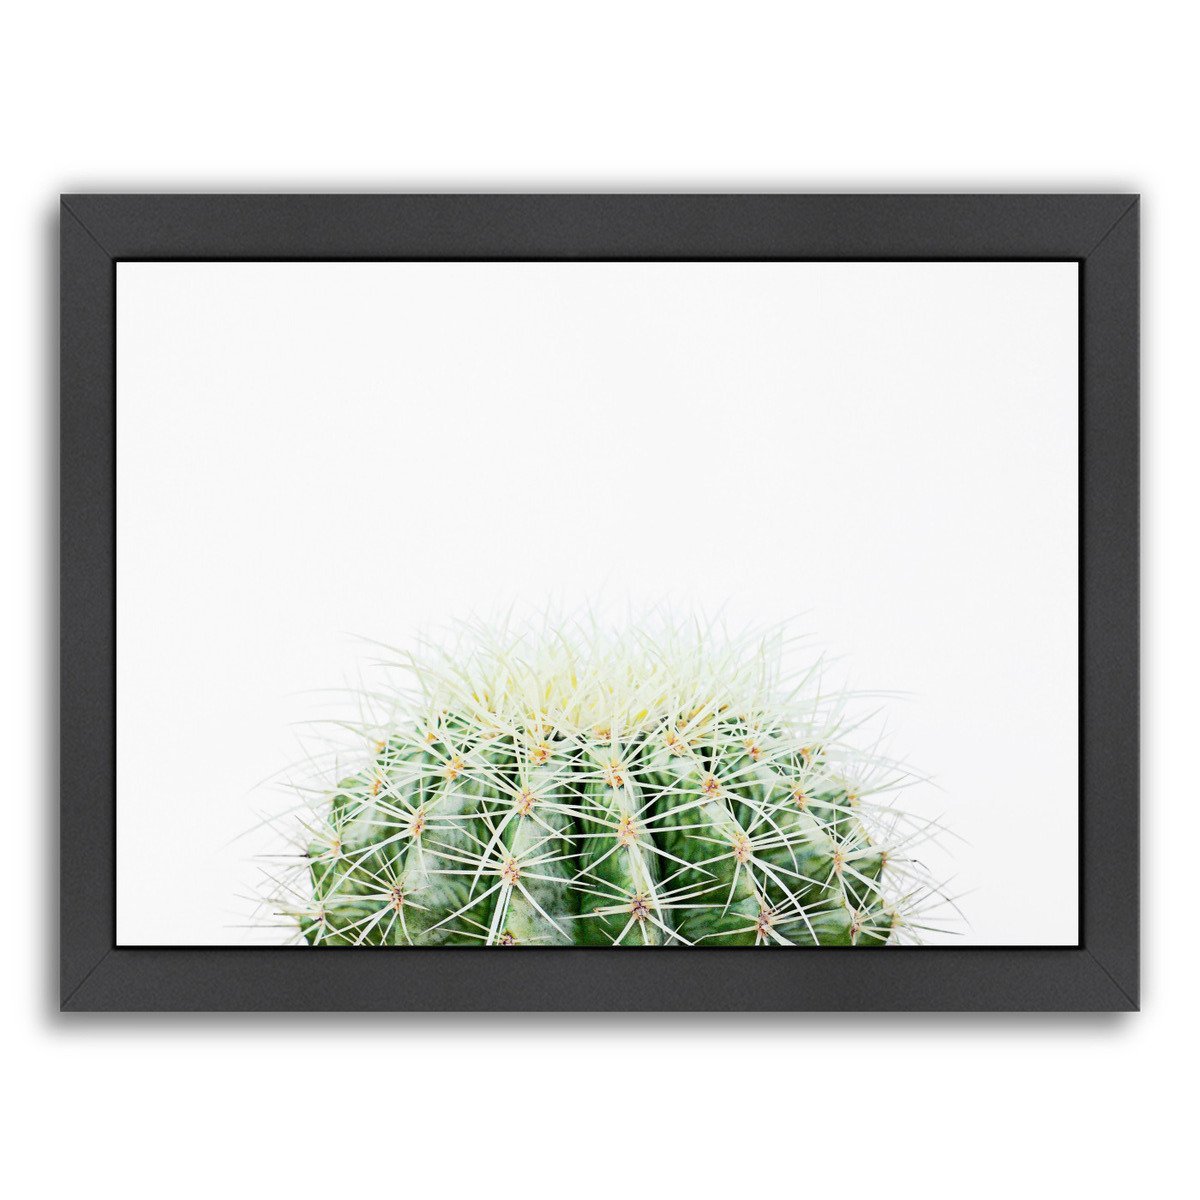 Barrel Cactus By The Gingham Owl - Black Framed Print - Wall Art - Americanflat